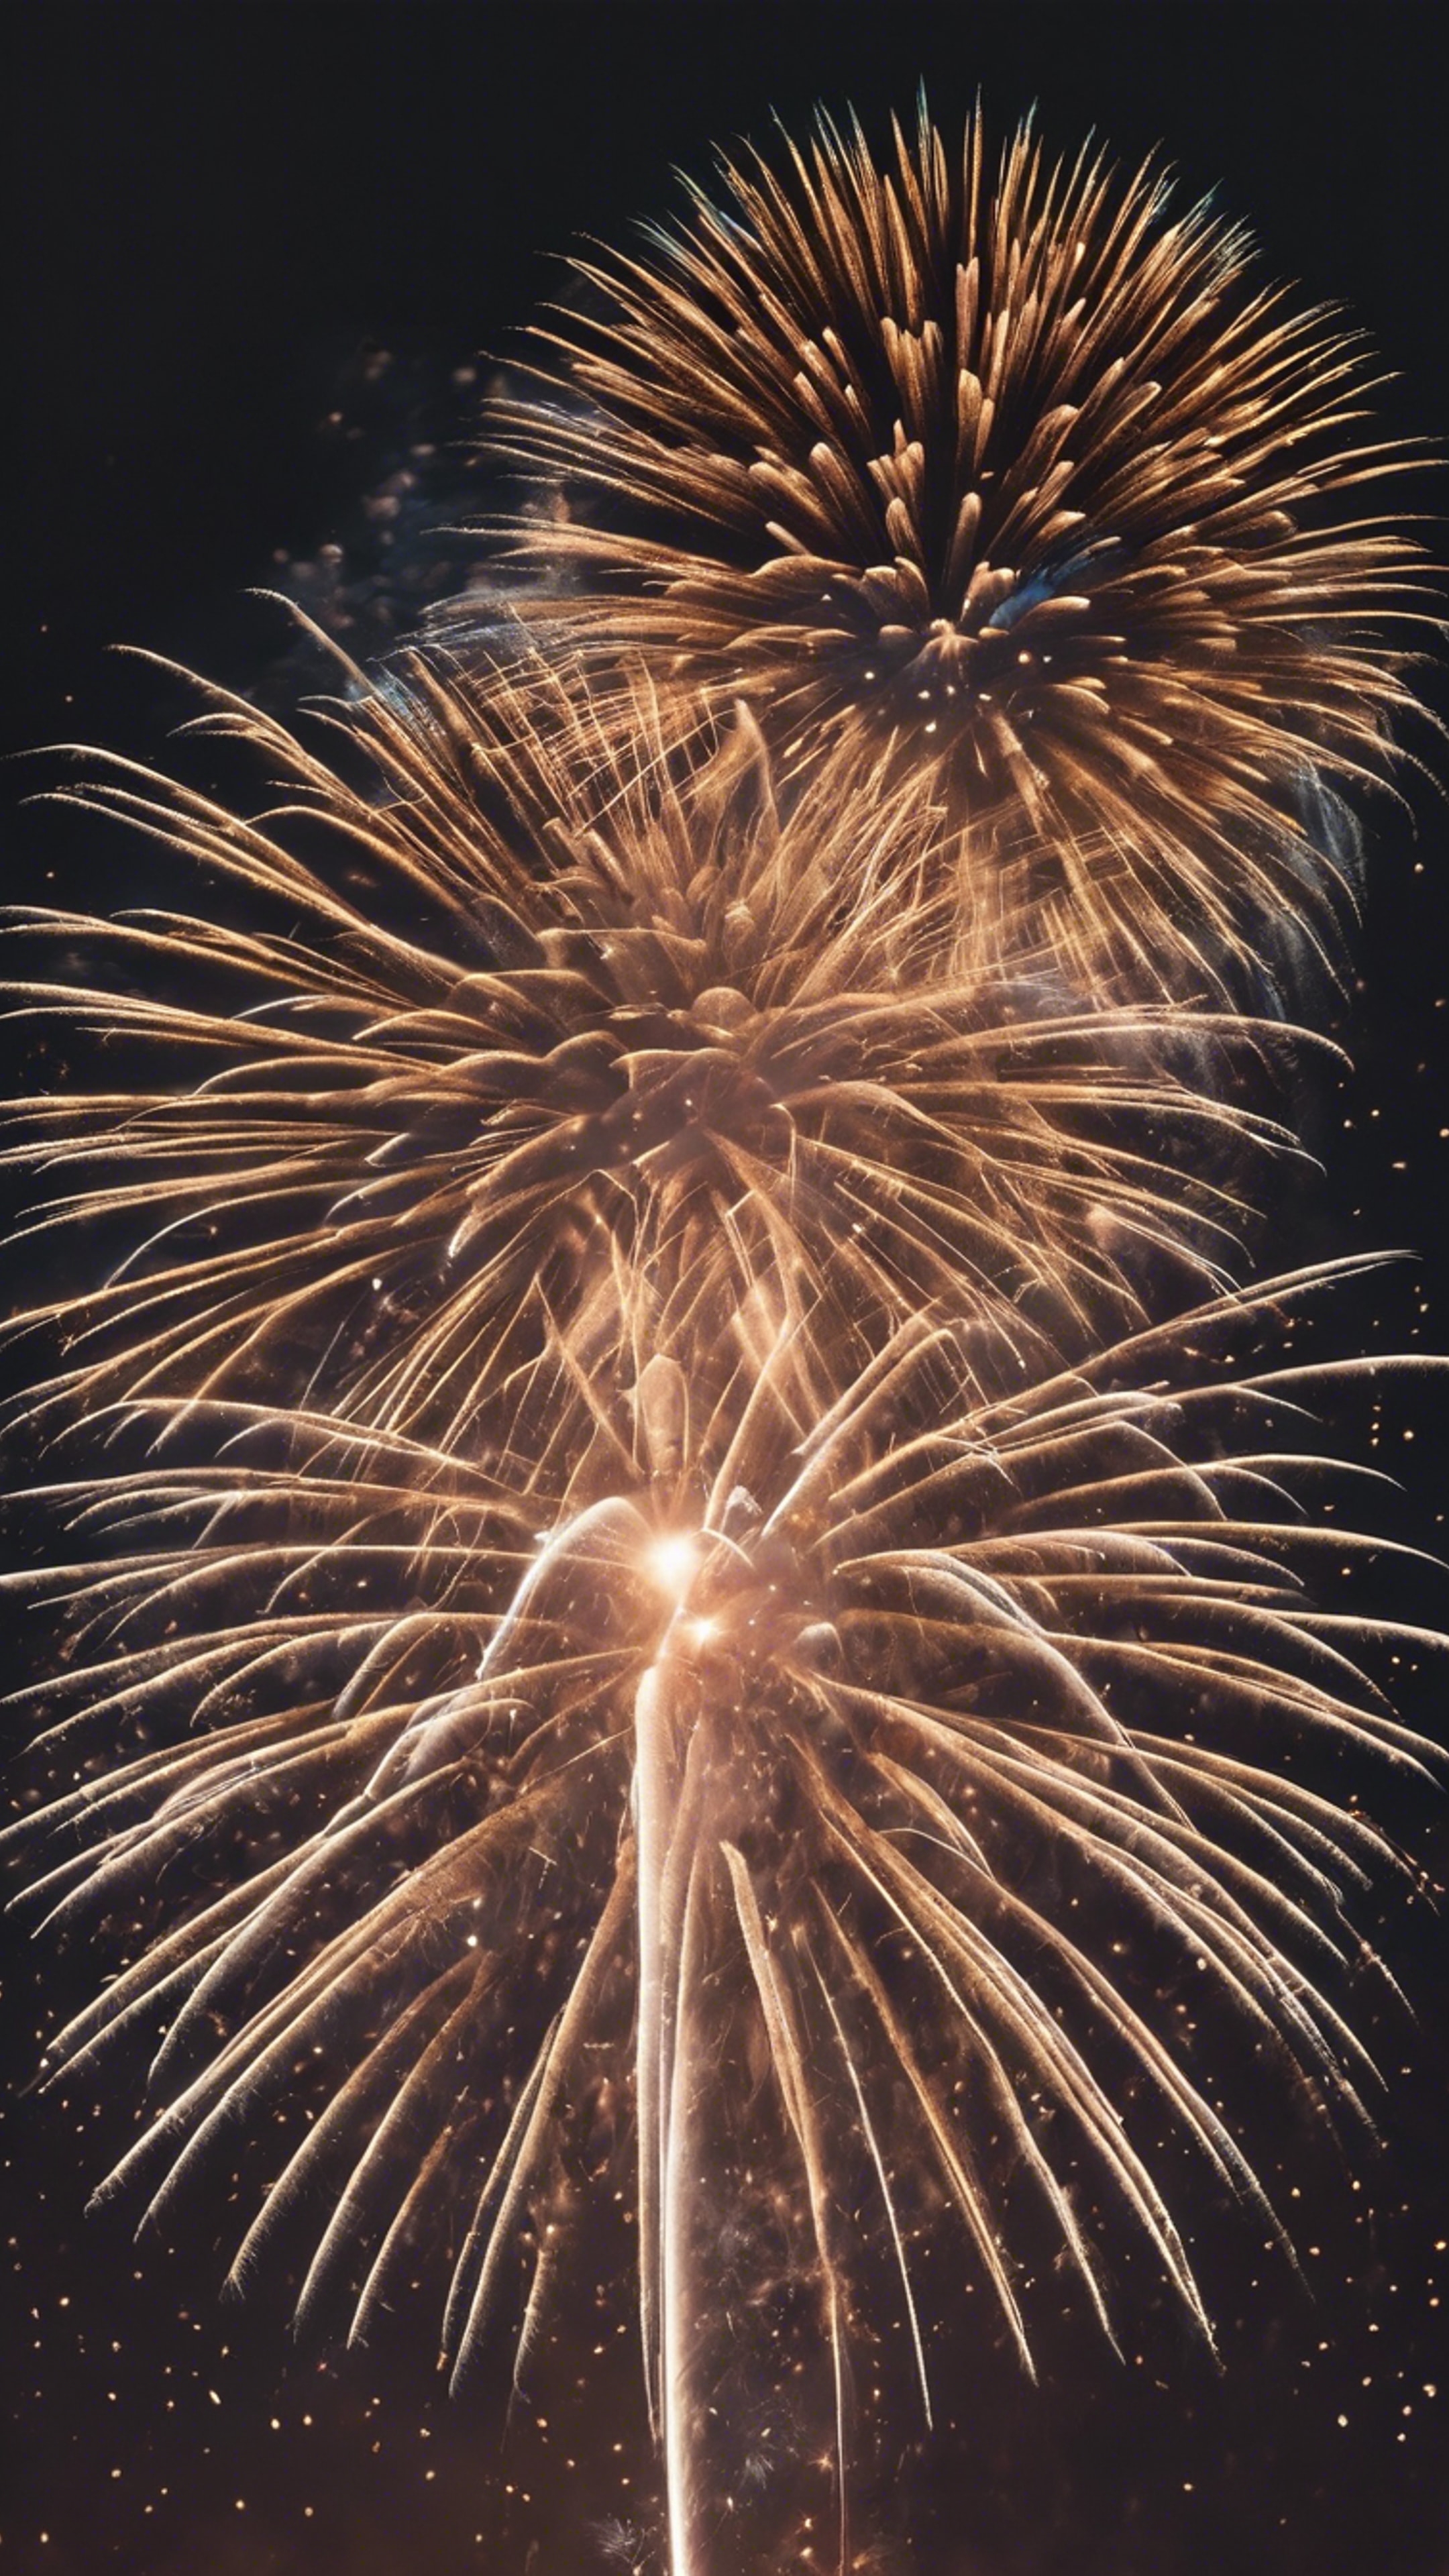 An image of a large detailed fireworks display illuminating the night sky during a New Year's celebration. Wallpaper[4449eb809ead4bc3a95f]